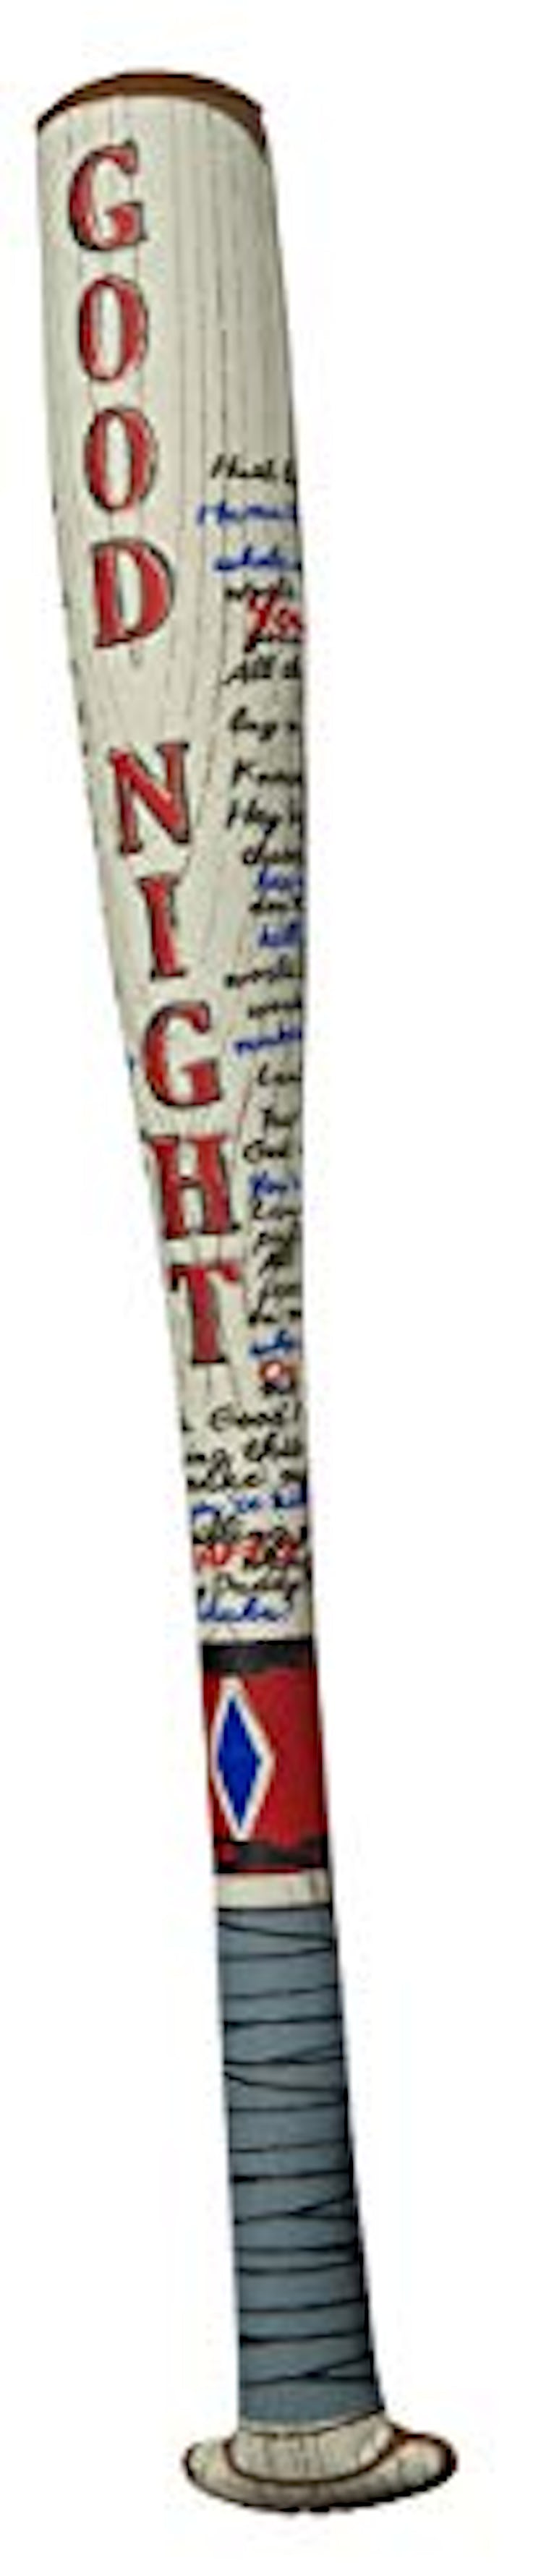 Cyberteez Harley Quinn Inflatable Baseball Bat Suicide Squad Costume Accessory White